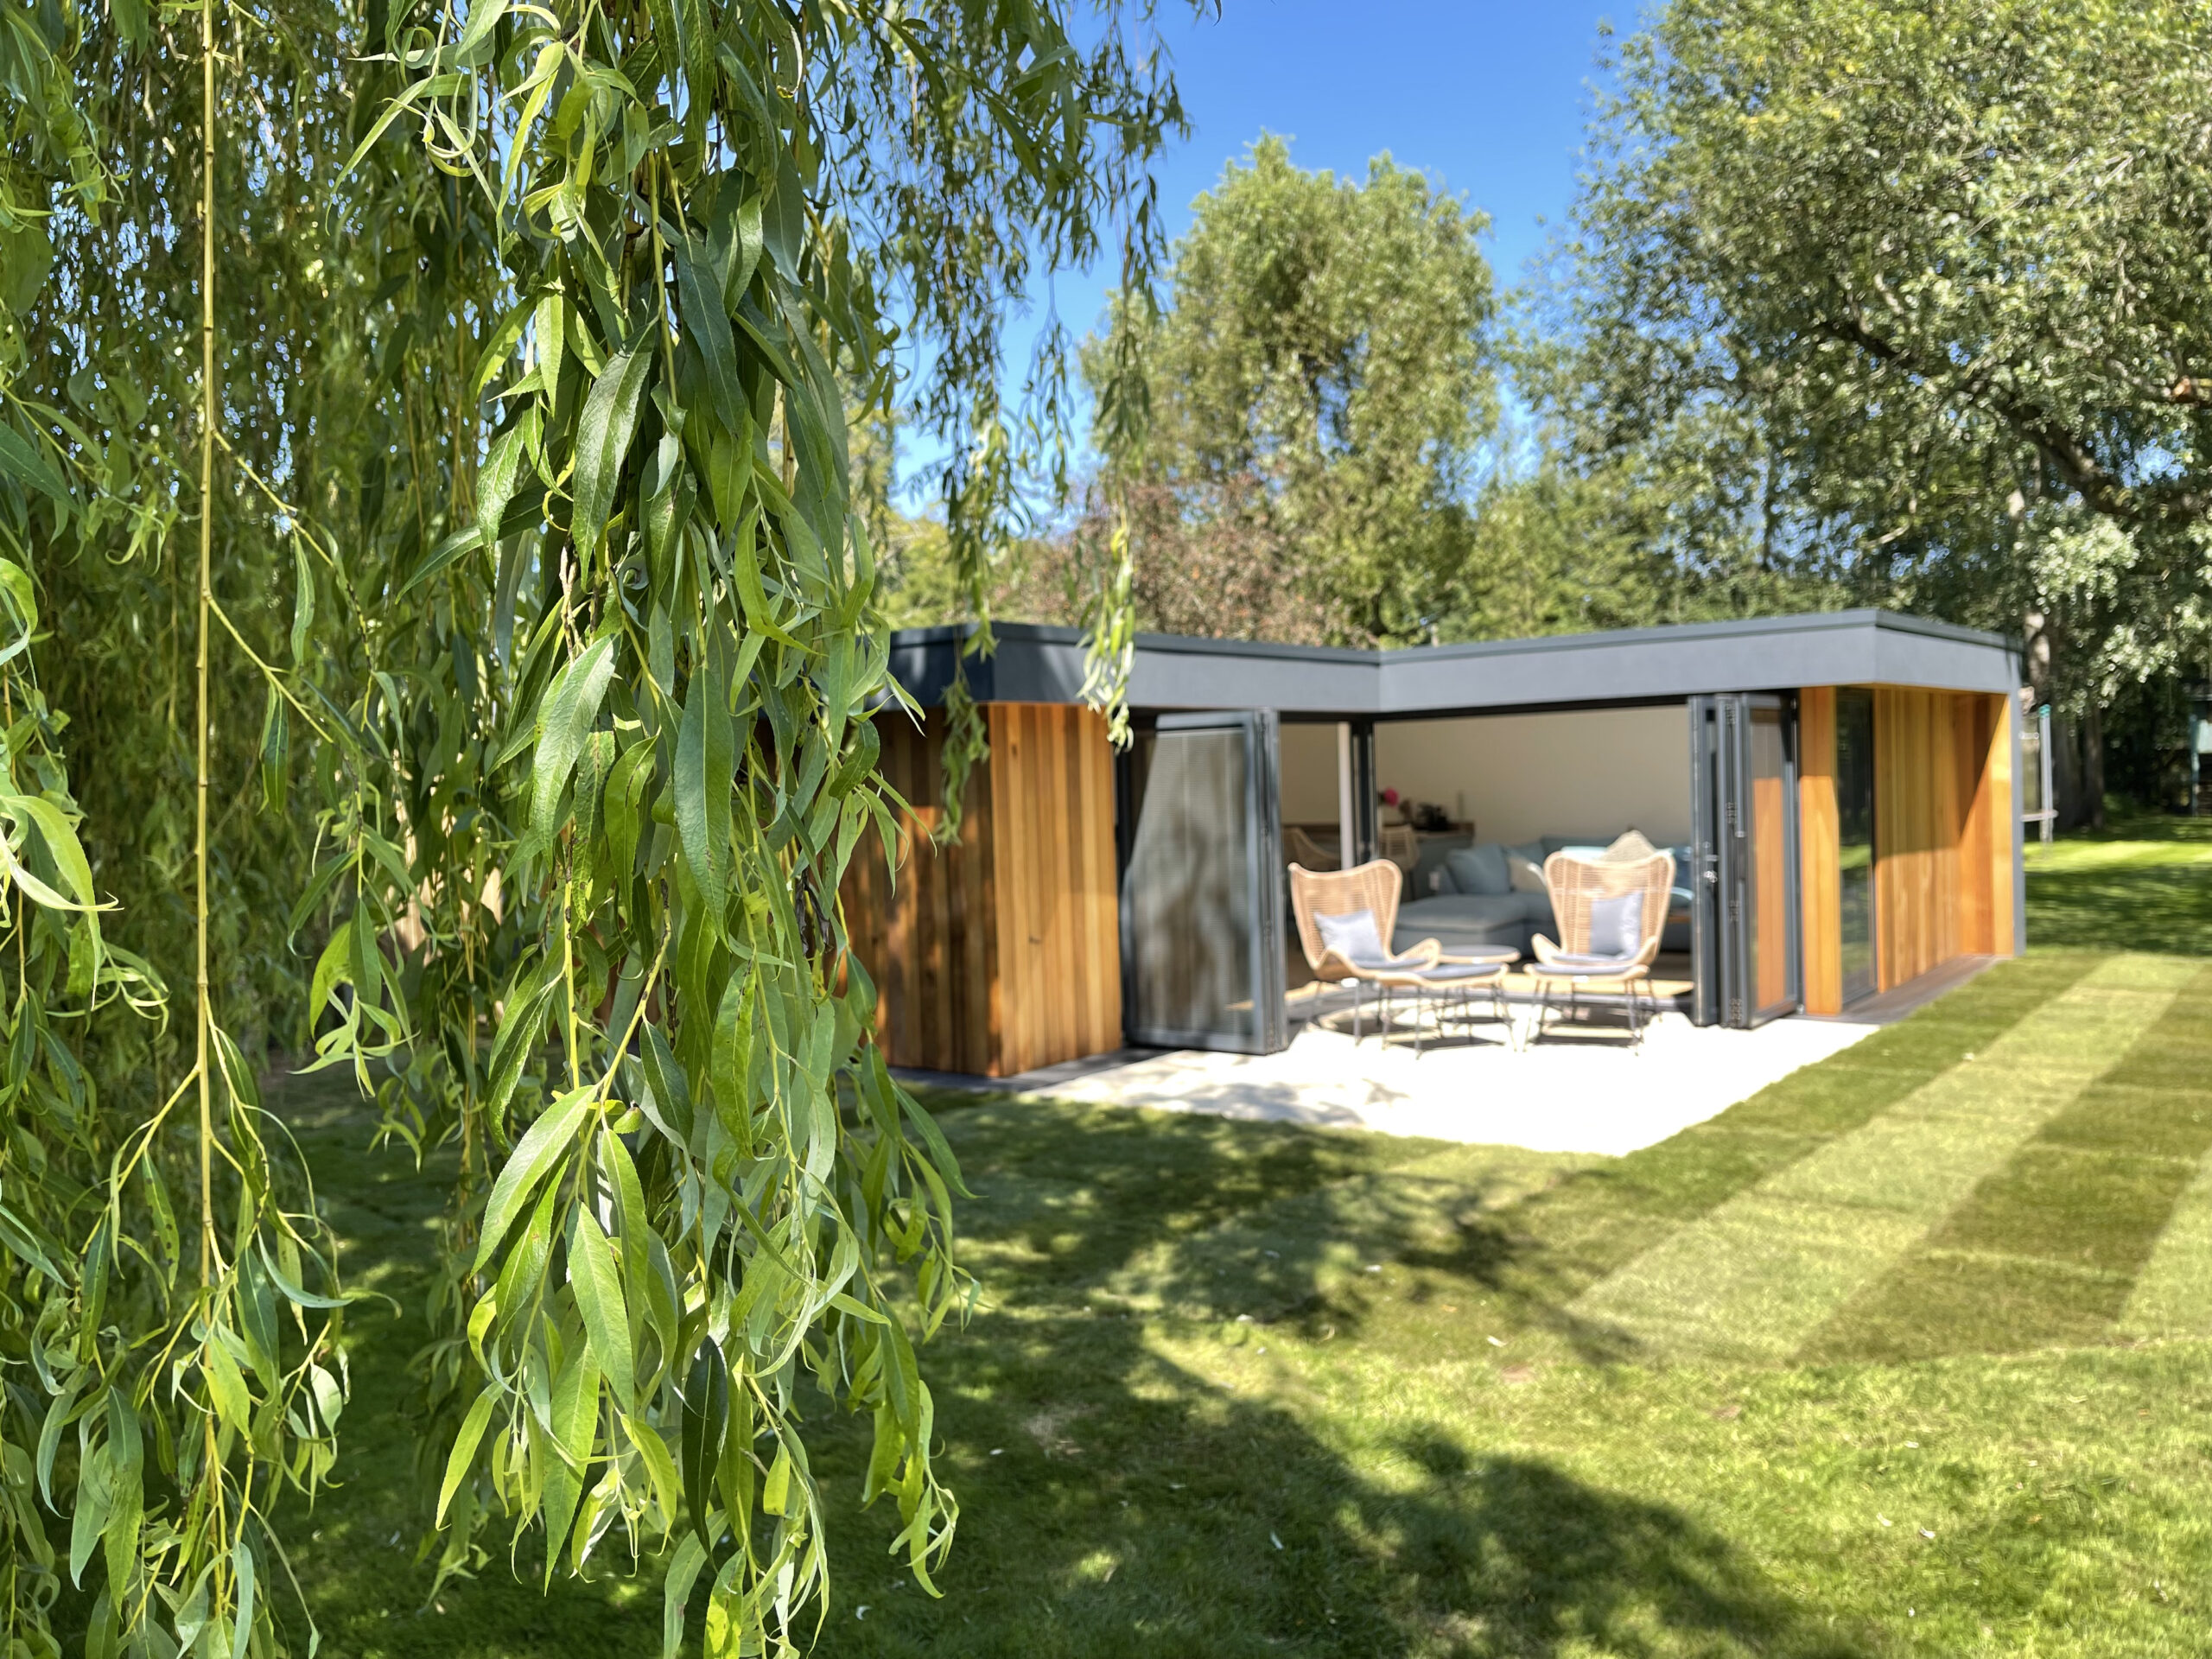 Exterior view of a Vivid Green flat roof L-shaped garden studio with western red cedar cladding on the walls and anthracite grey render framing the overhang, open anthracite grey aluminium bi-fold doors and windows, and a small outdoor furniture set on a tiled patio surrounded by grass and trees on a sunny day